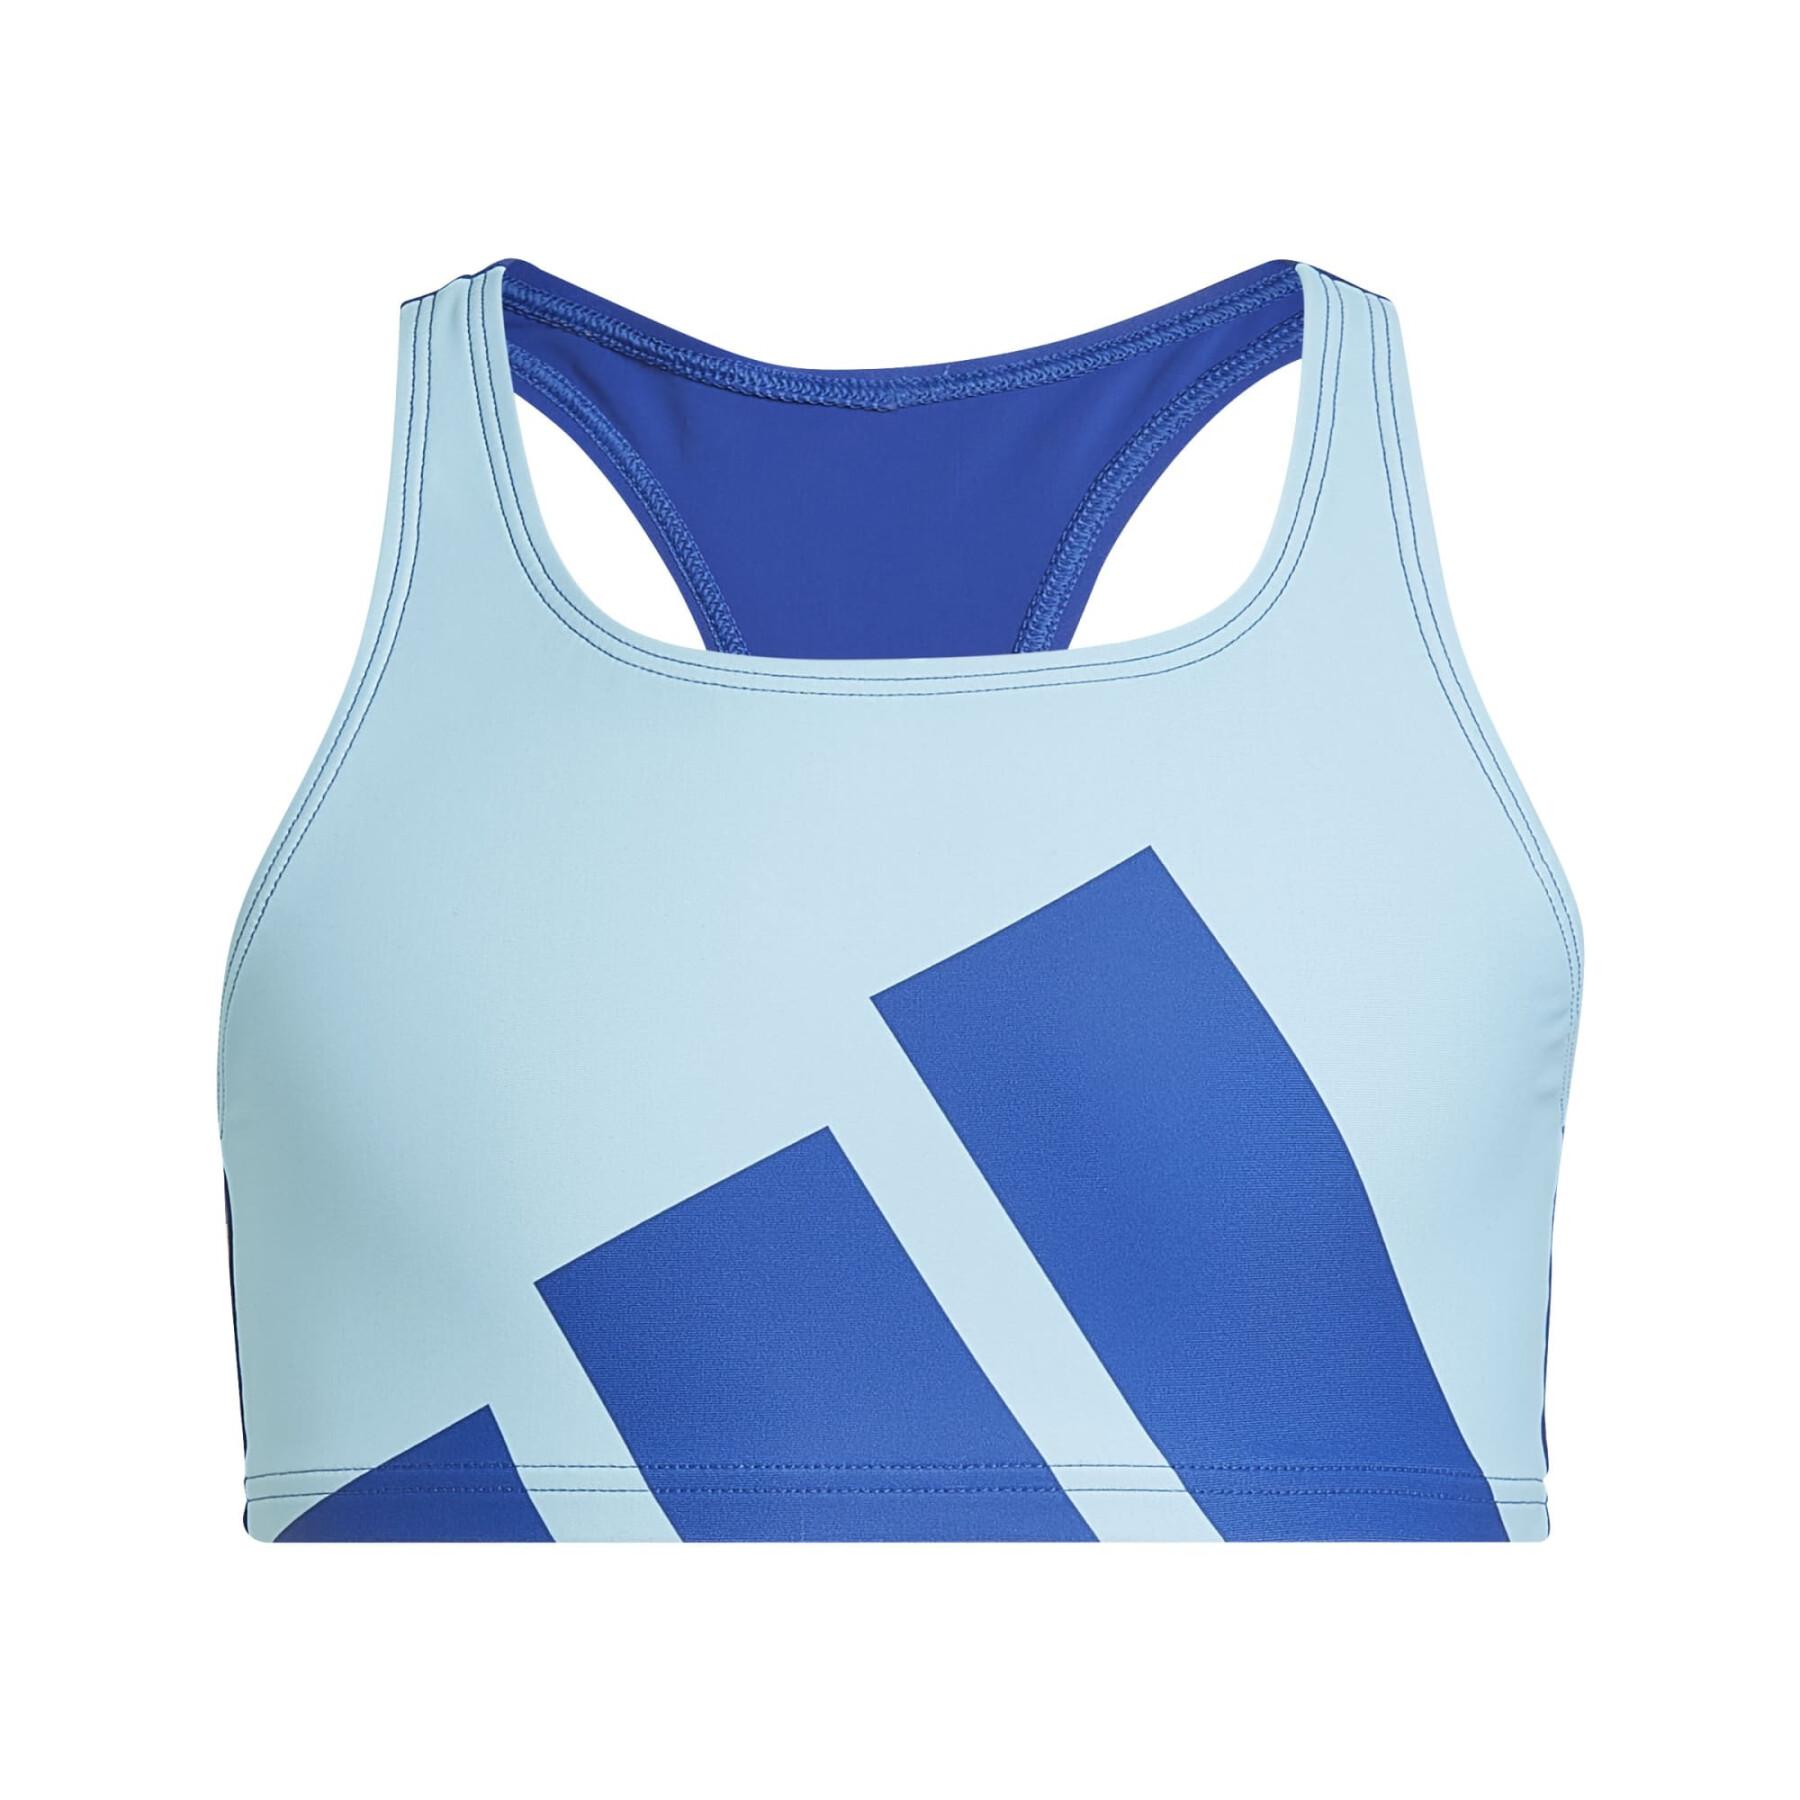 2-piece swimsuit for girls adidas